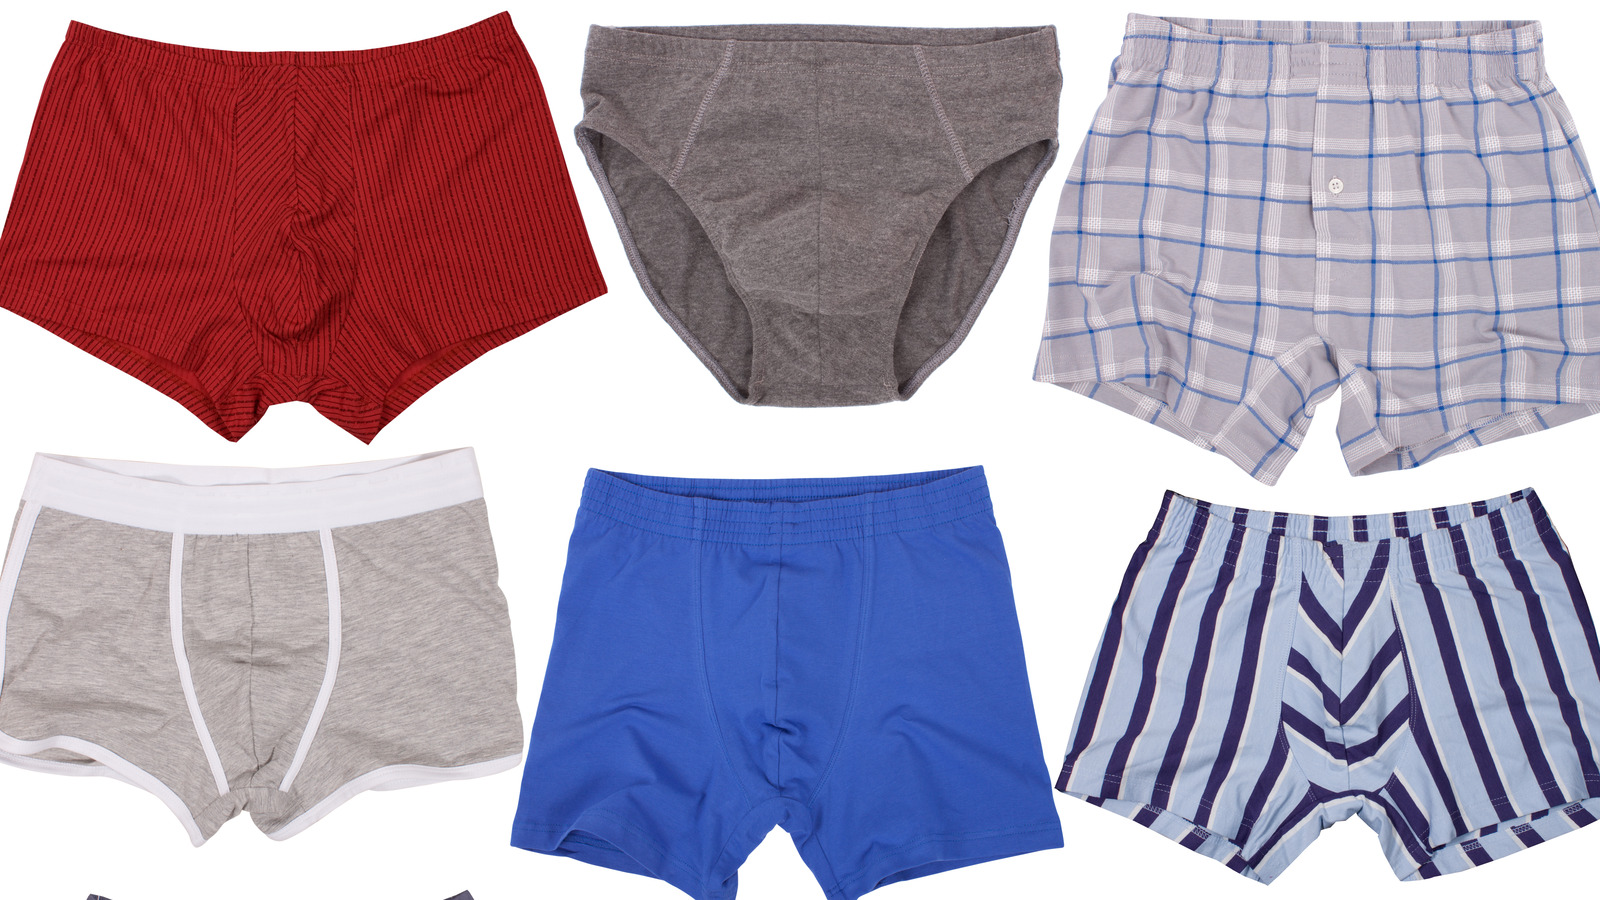 https://www.healthdigest.com/img/gallery/boxers-vs-briefs-which-one-is-better-for-mens-health/l-intro-1619199392.jpg